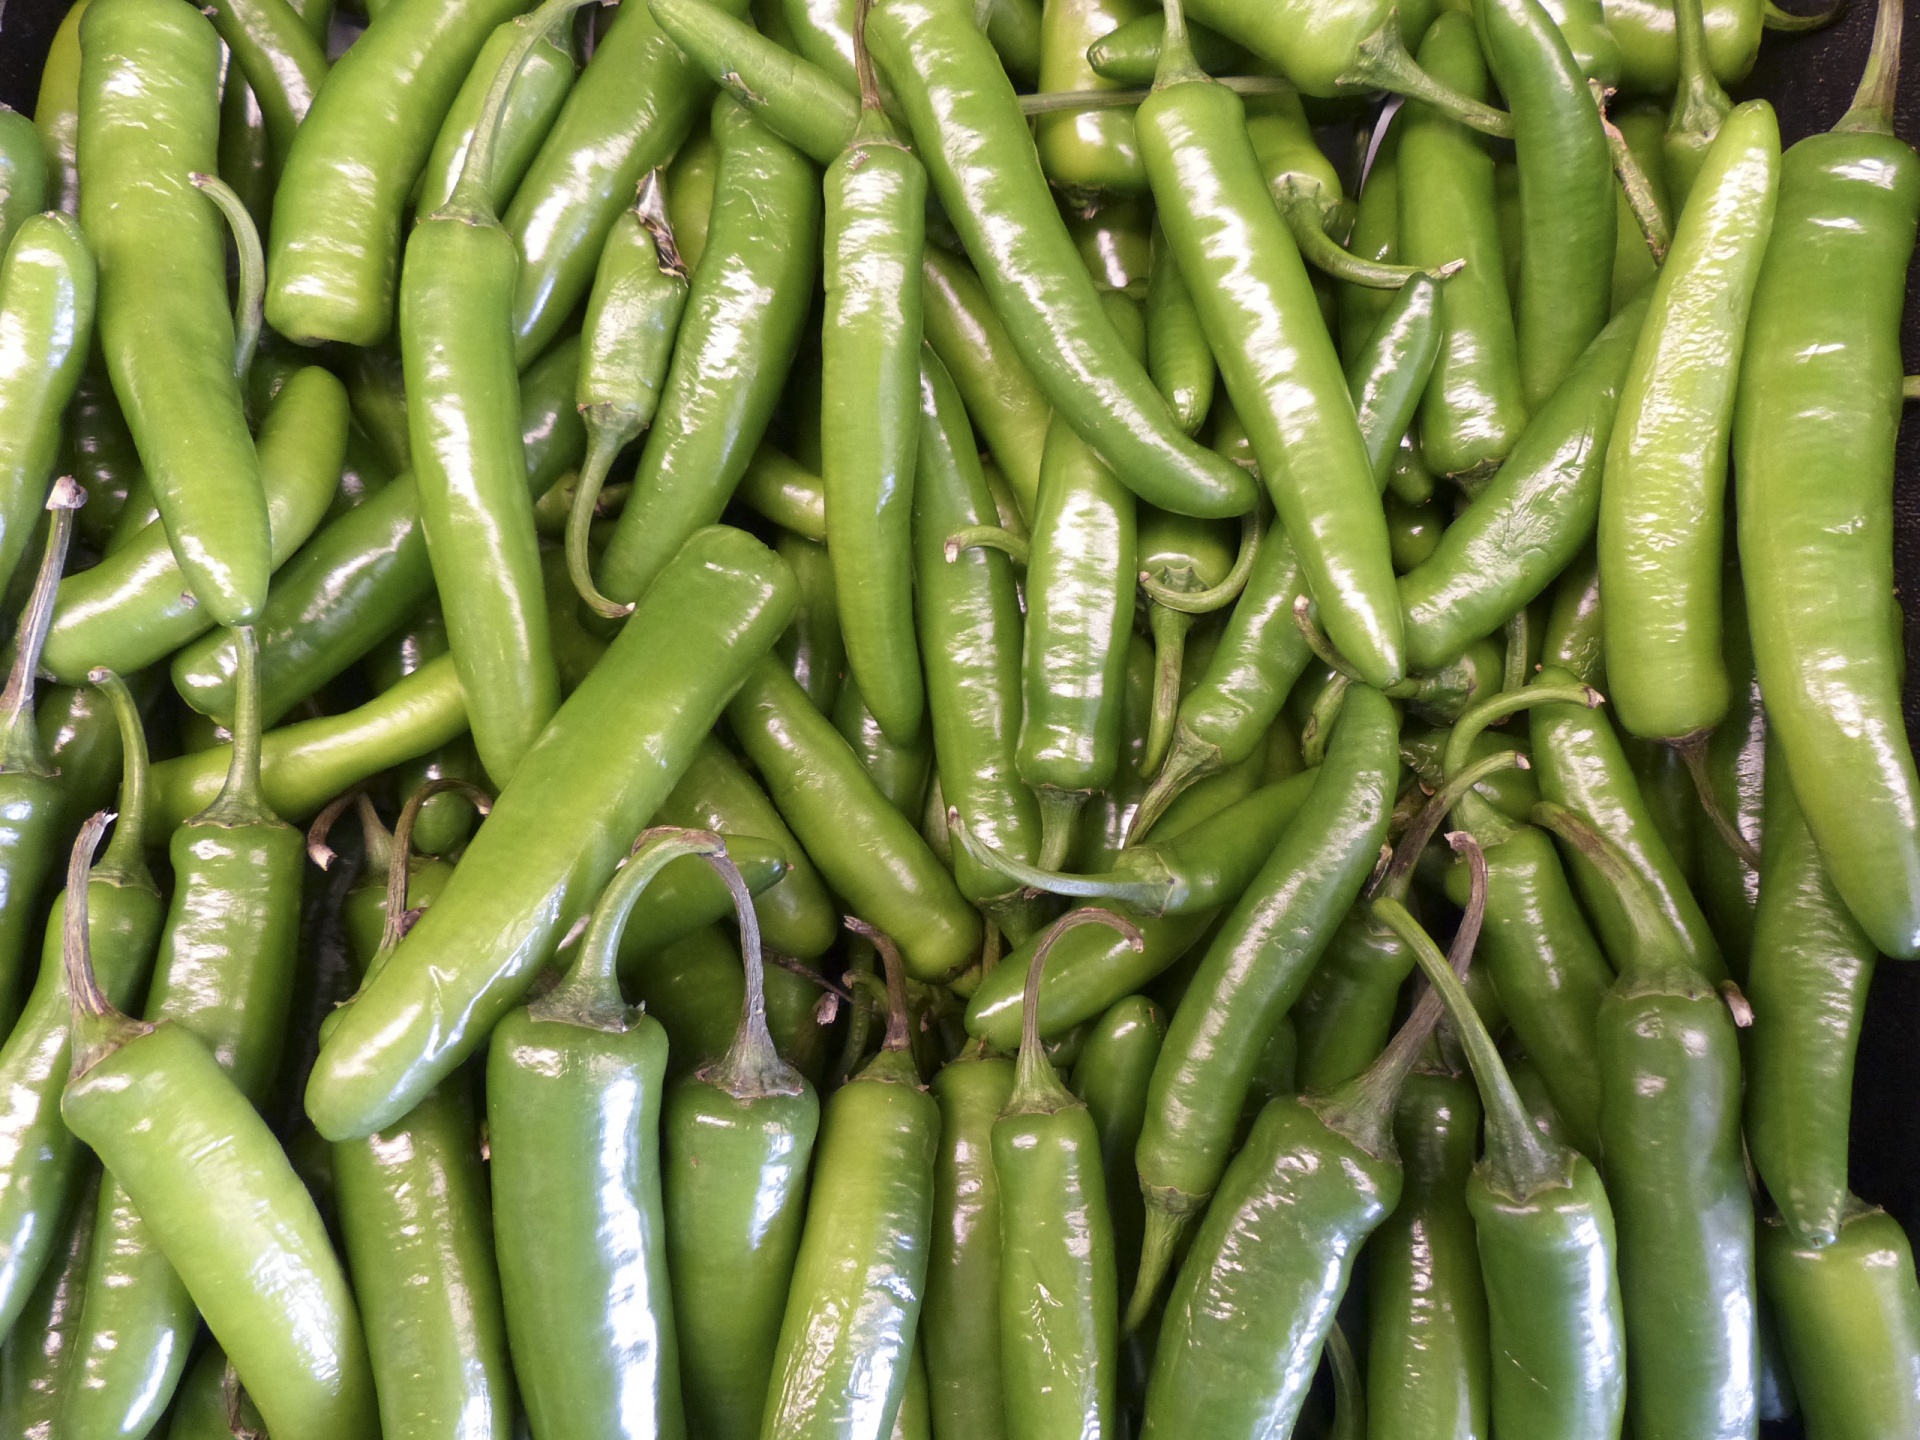 Organic chili peppers in the market